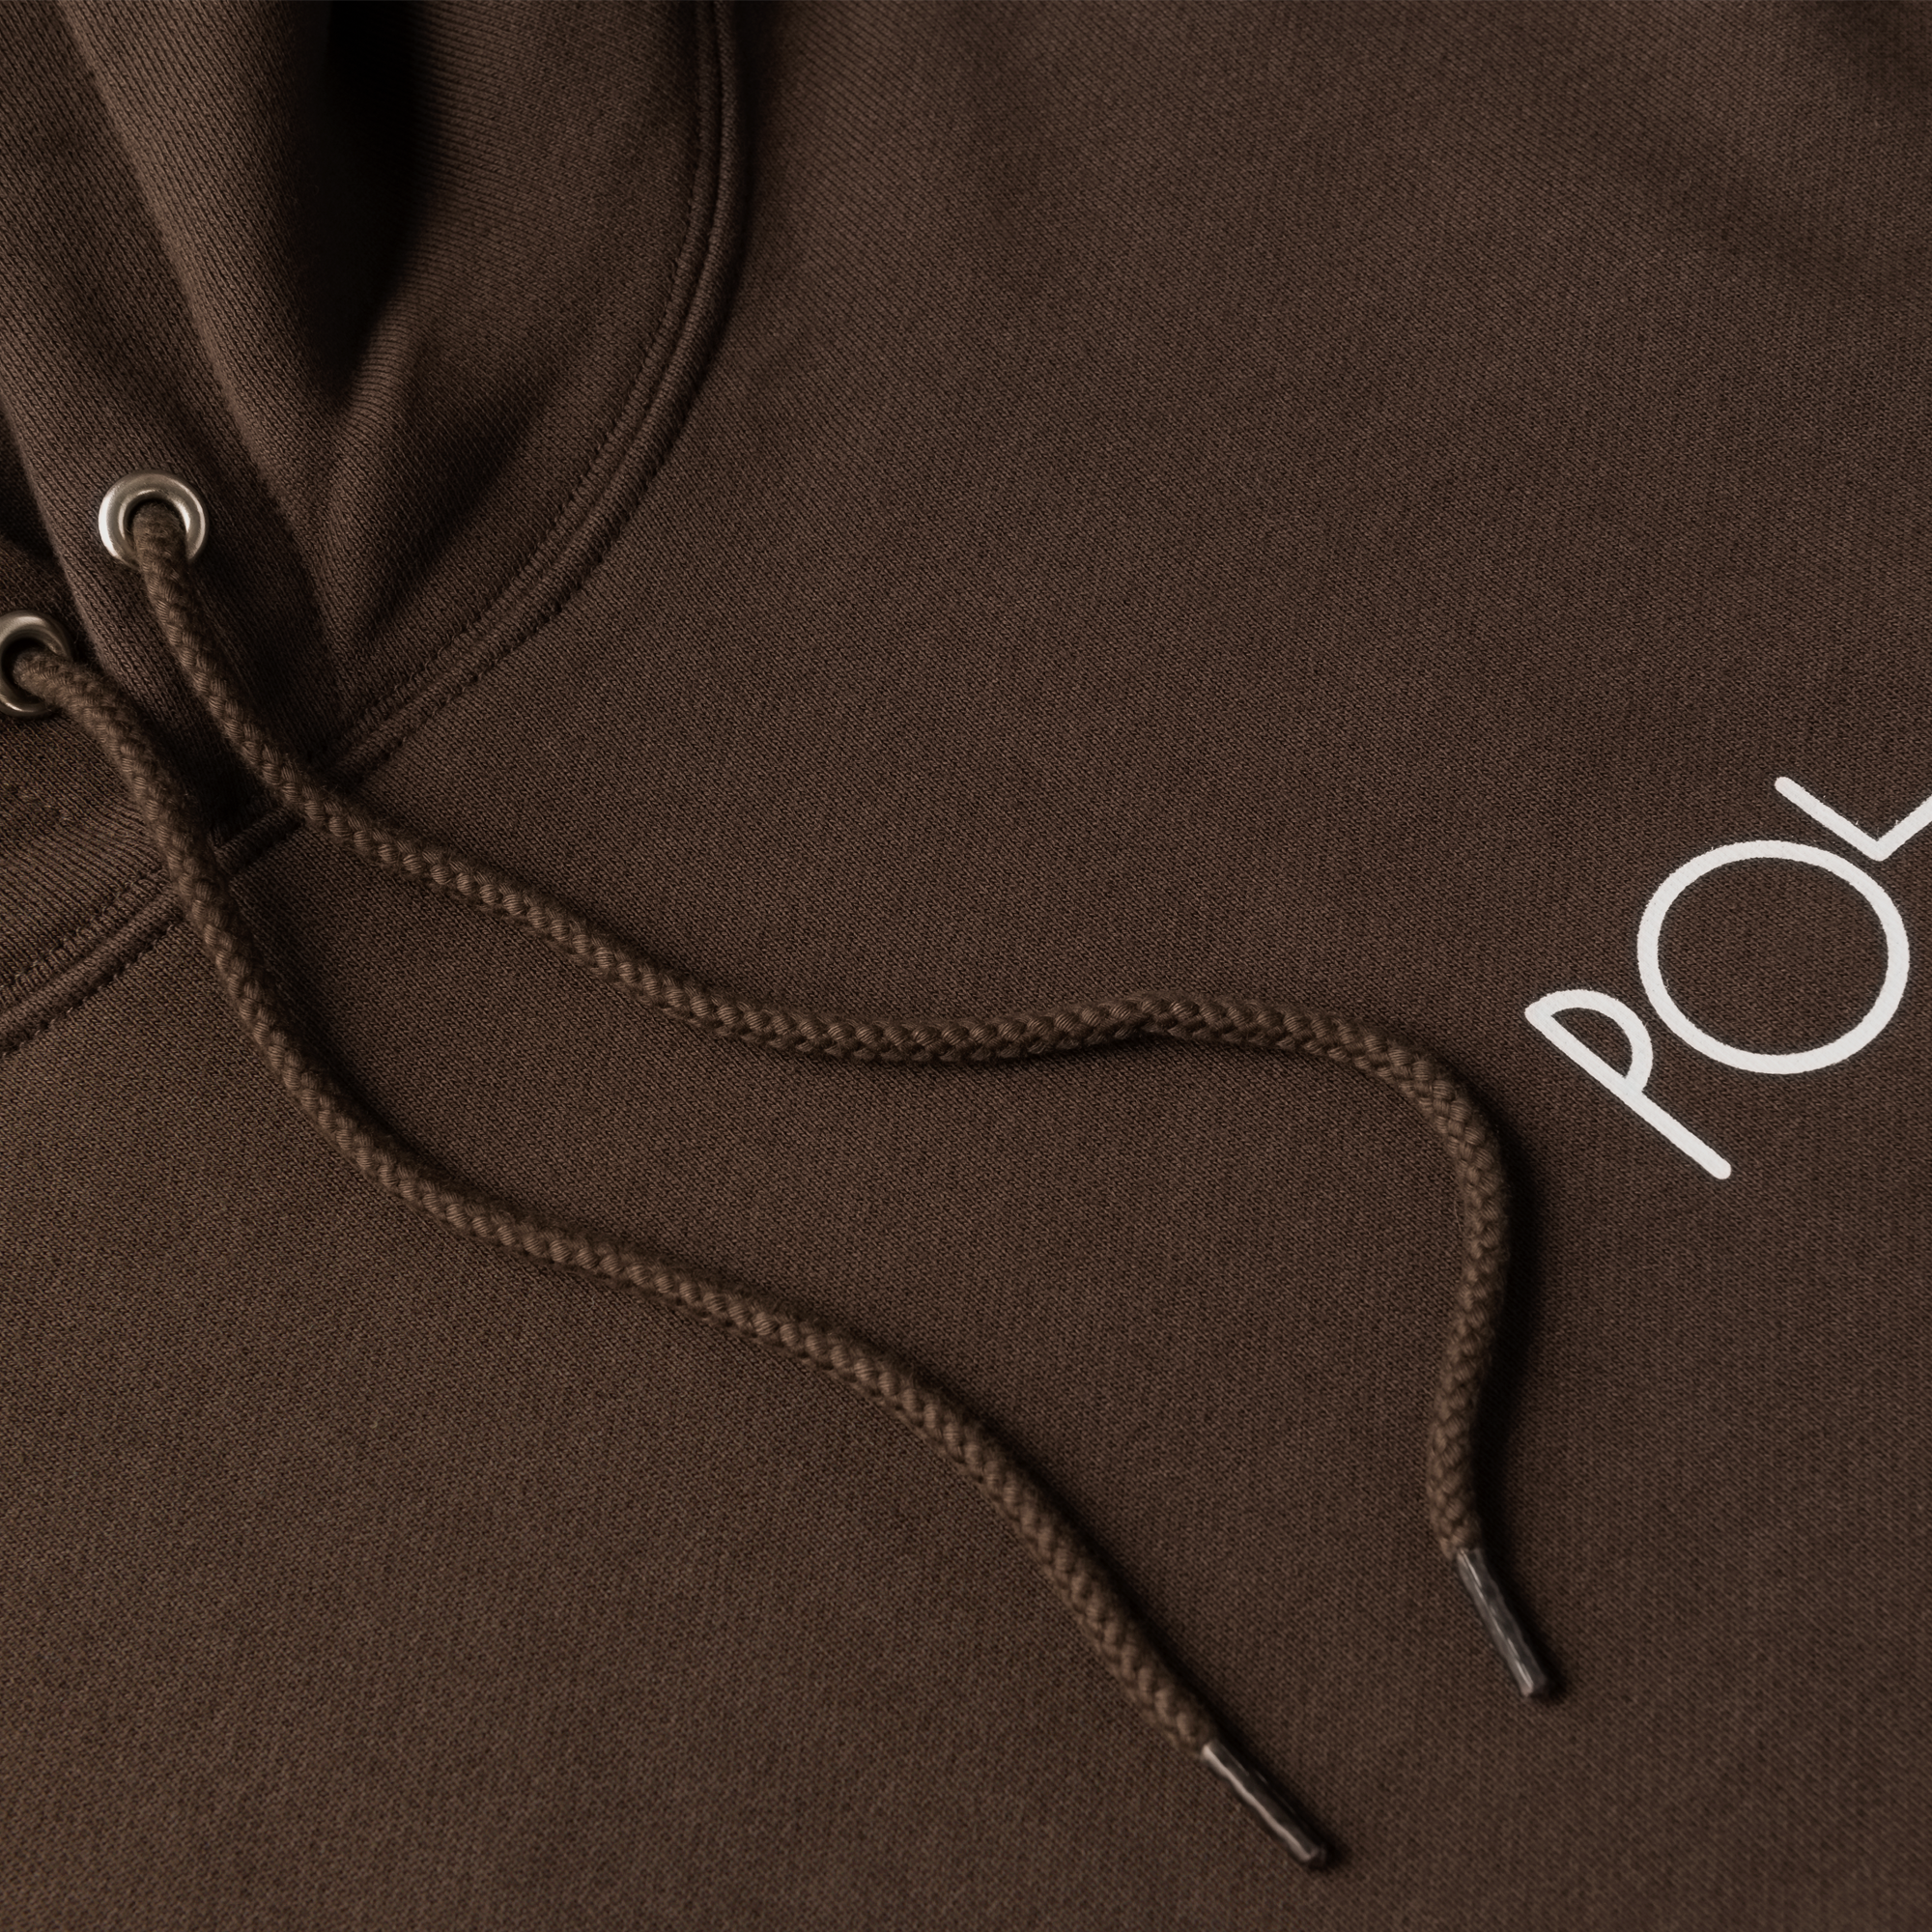 Brown polar hooded sweatshirt with white logos on front and back. Free uk shipping on orders over £50